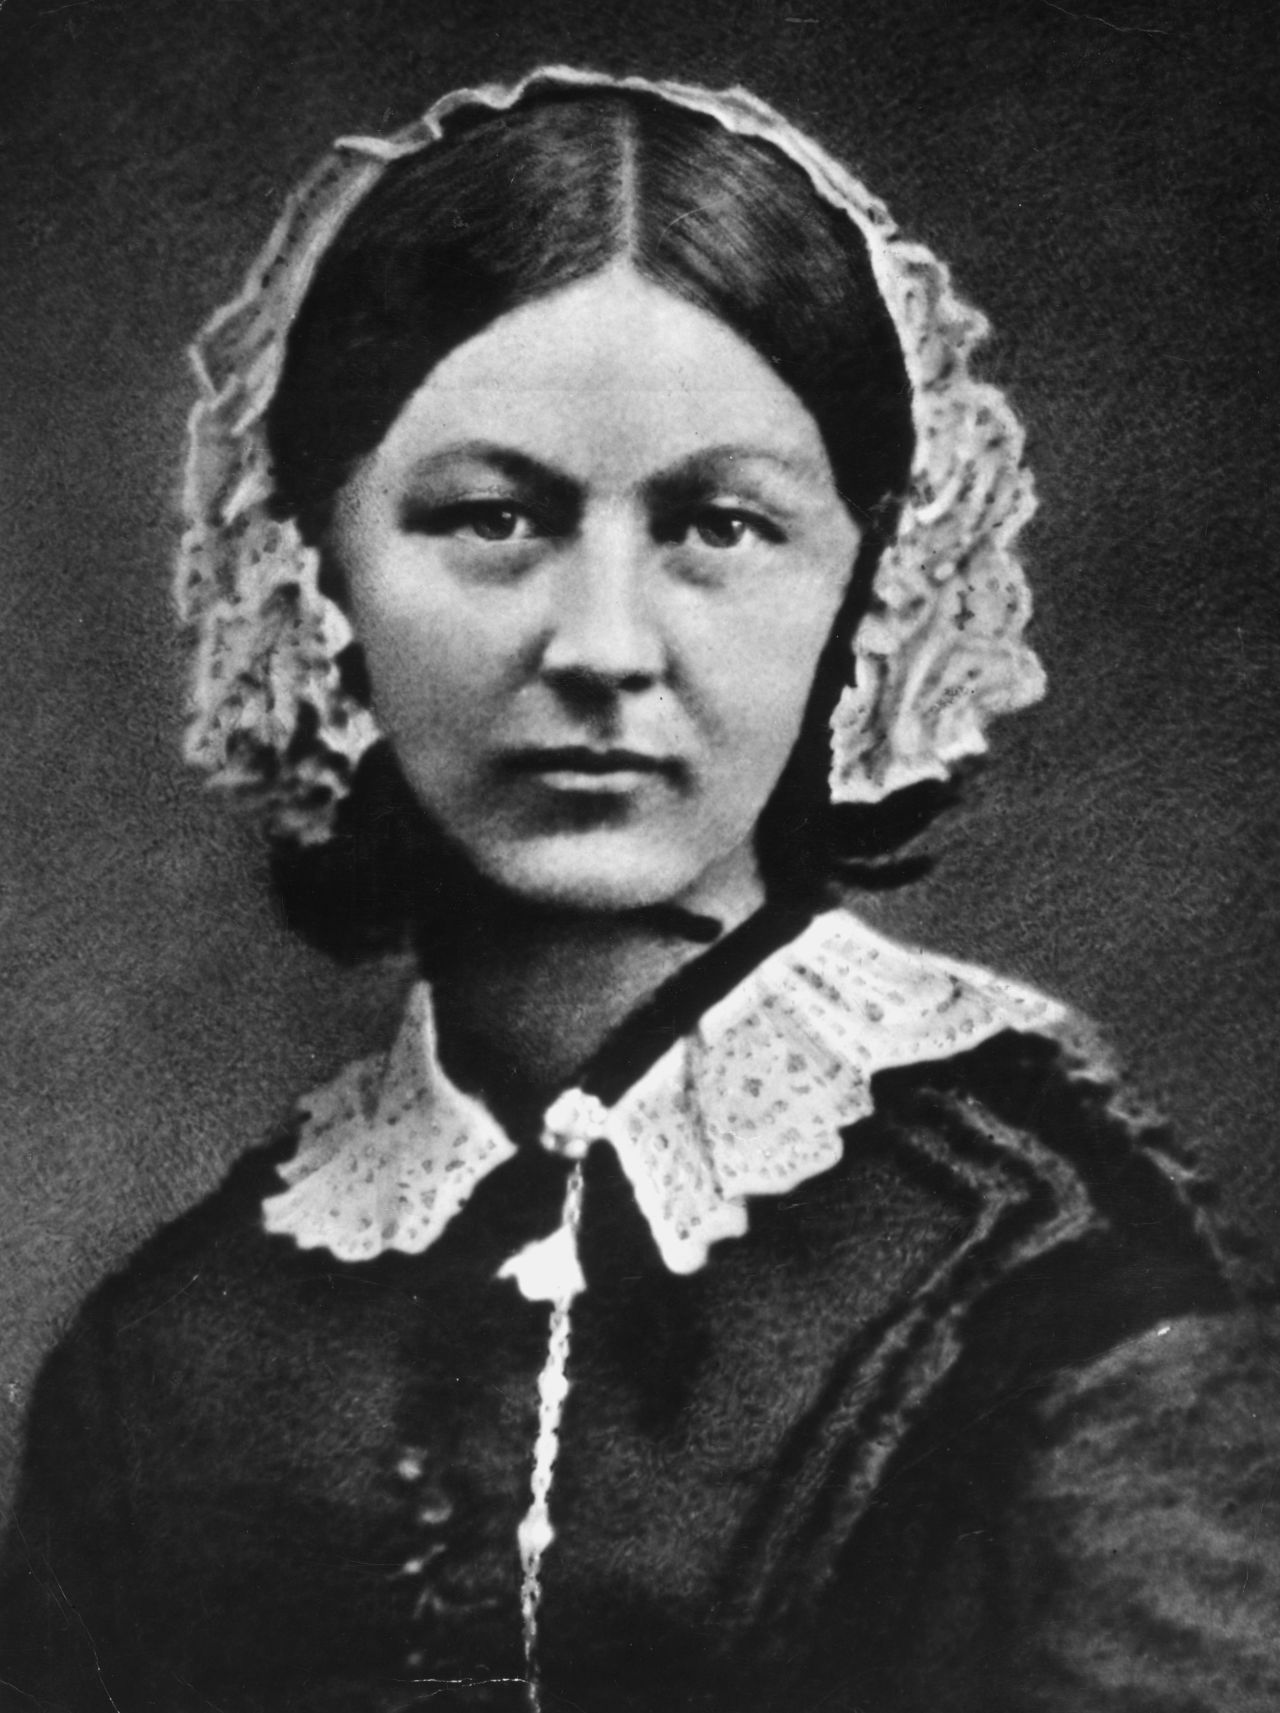 <a href="http://www.ncbi.nlm.nih.gov/pmc/articles/PMC2920984/" target="_blank" target="_blank">Florence Nightingale</a> (1820-1910), reformer of English nursing, received the Order of Merit for her tireless efforts during the Crimean War. She was the first female recipient of this honor.